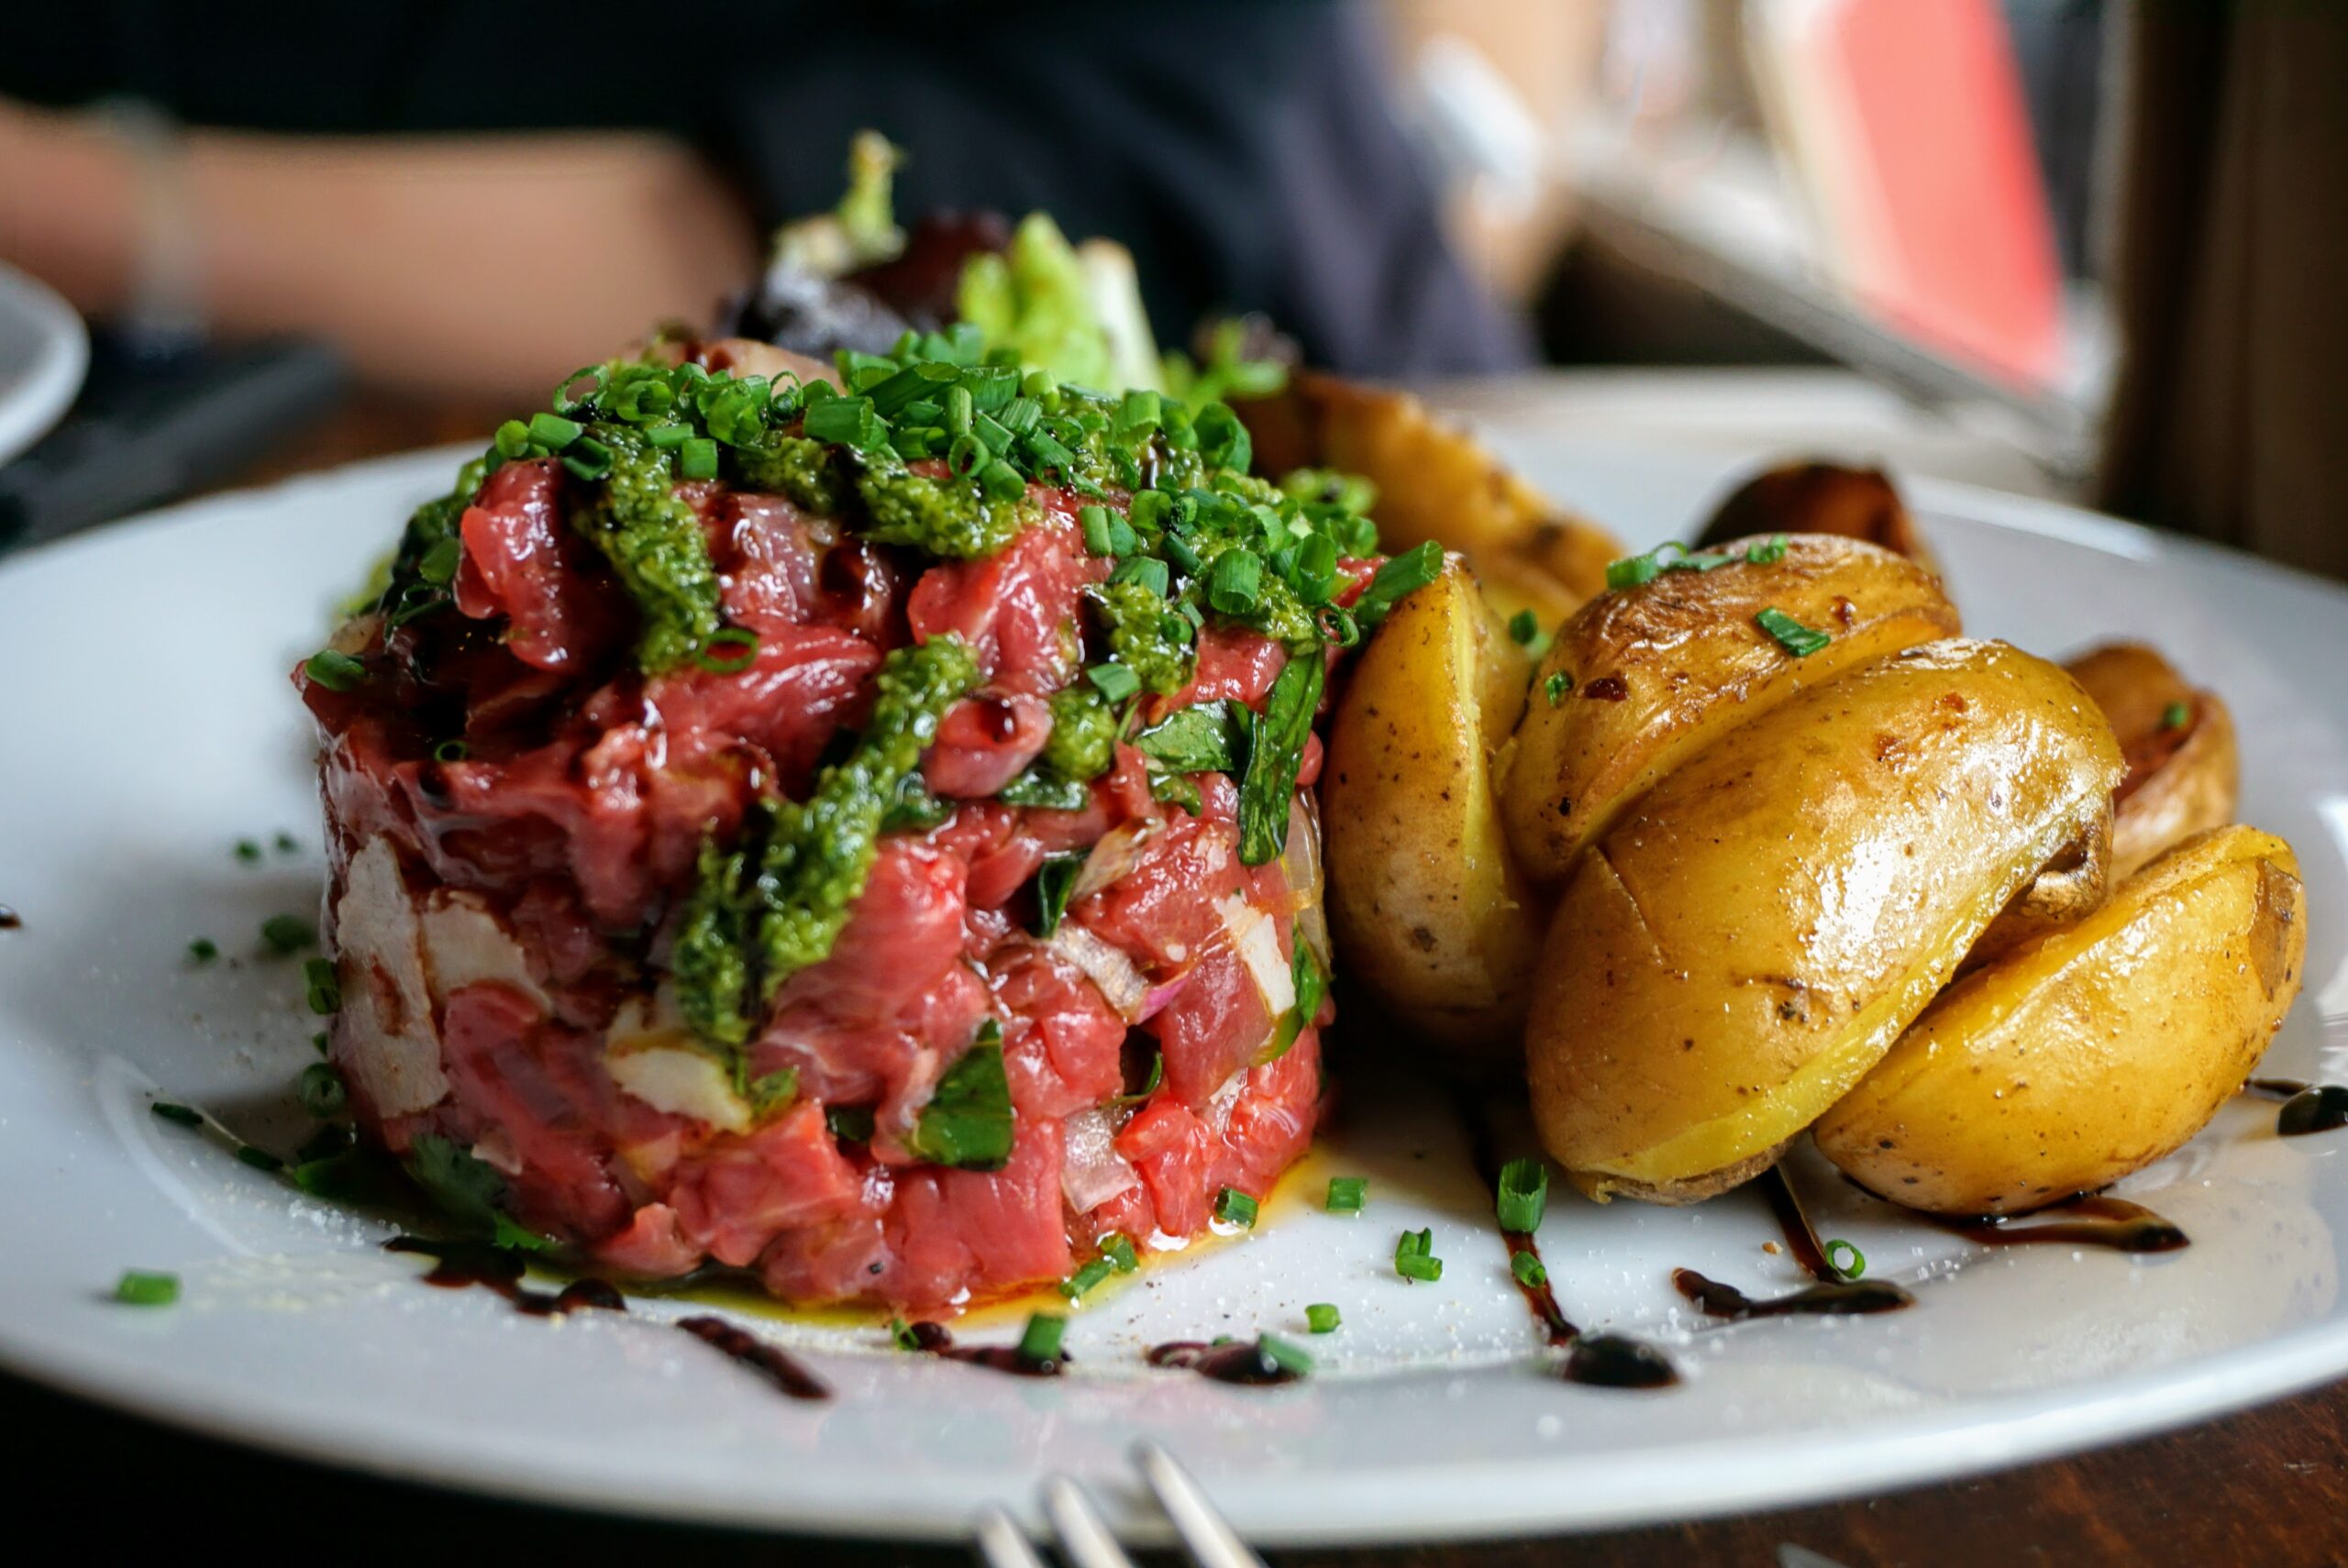 steak tartare with roasted potatoes on a white plate at a fine dining restaurant